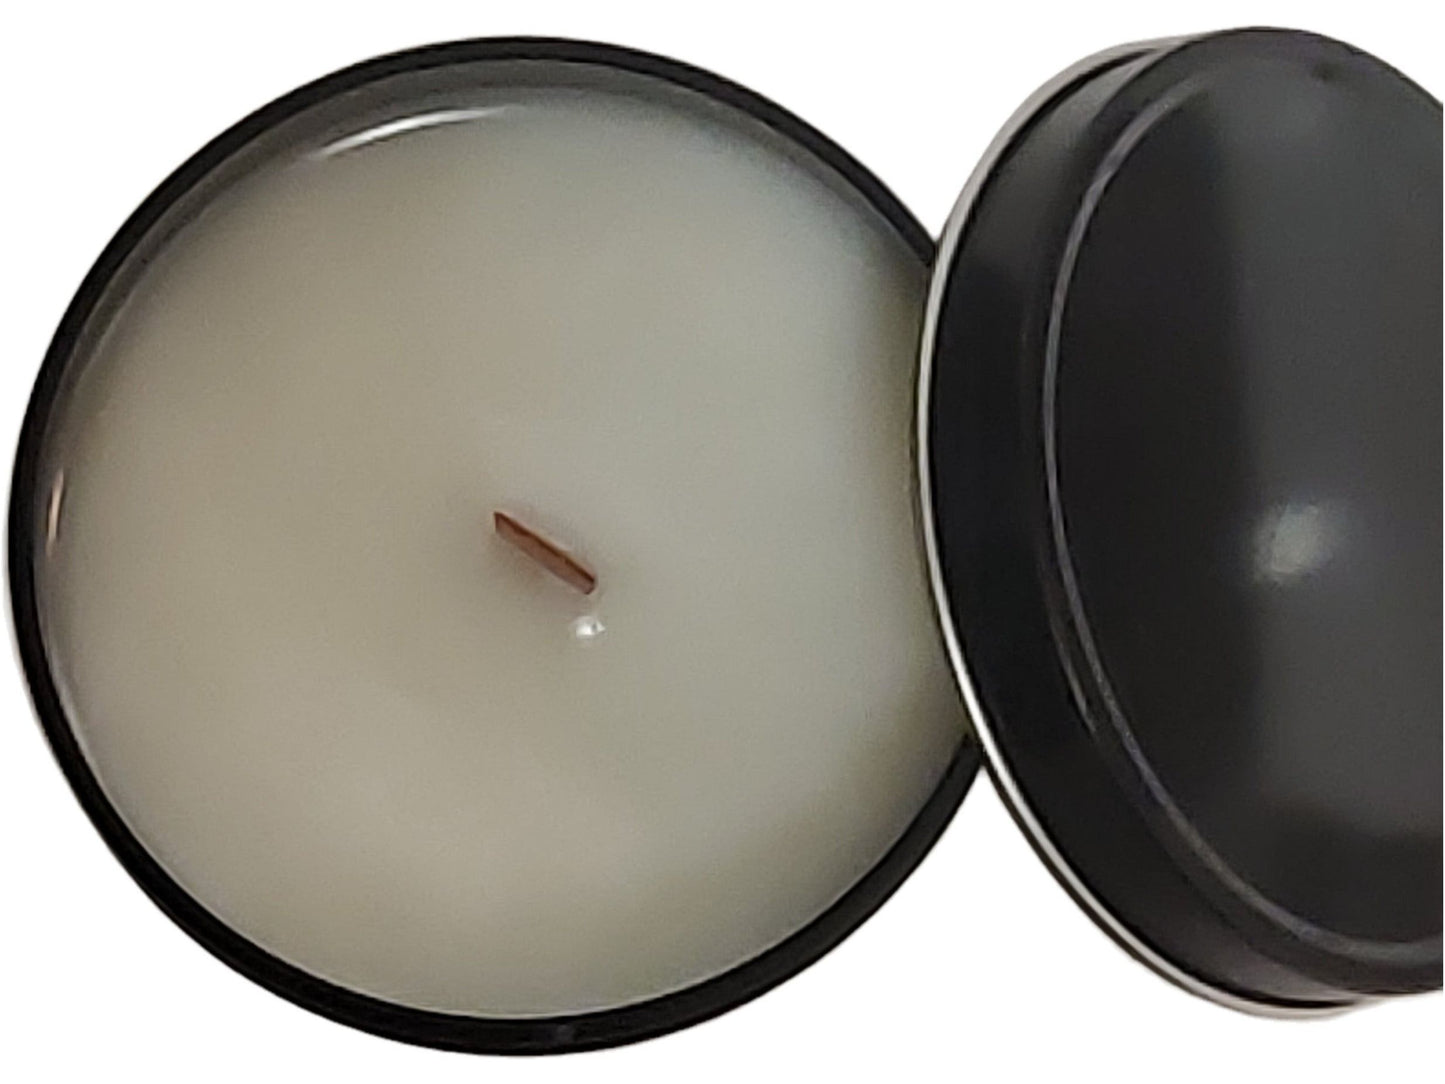 The Warrior Men's Candle Pampered Soaps